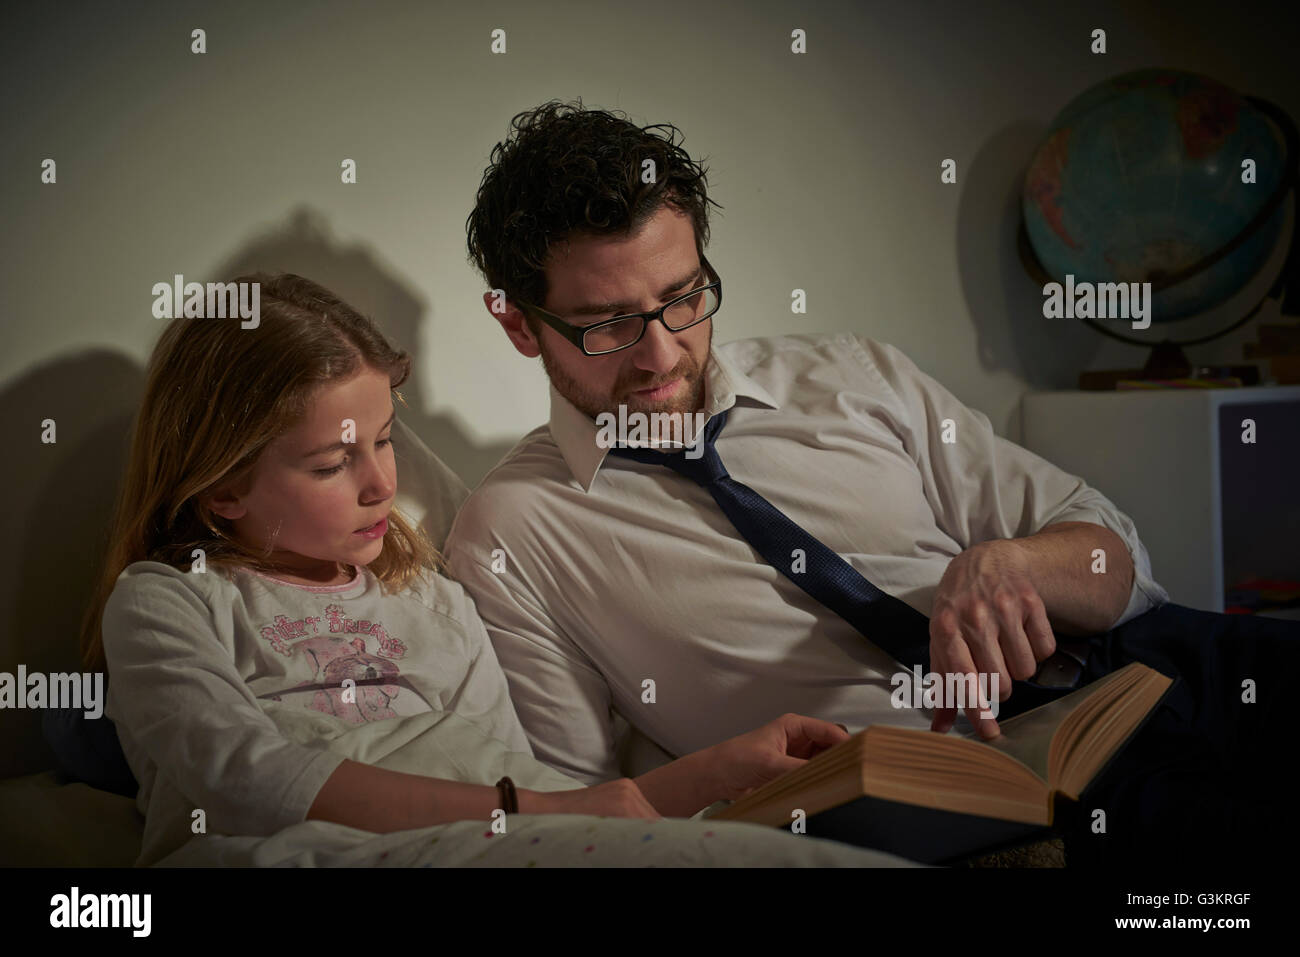 Businessman reading storybook to daughter at bedtime Stock Photo